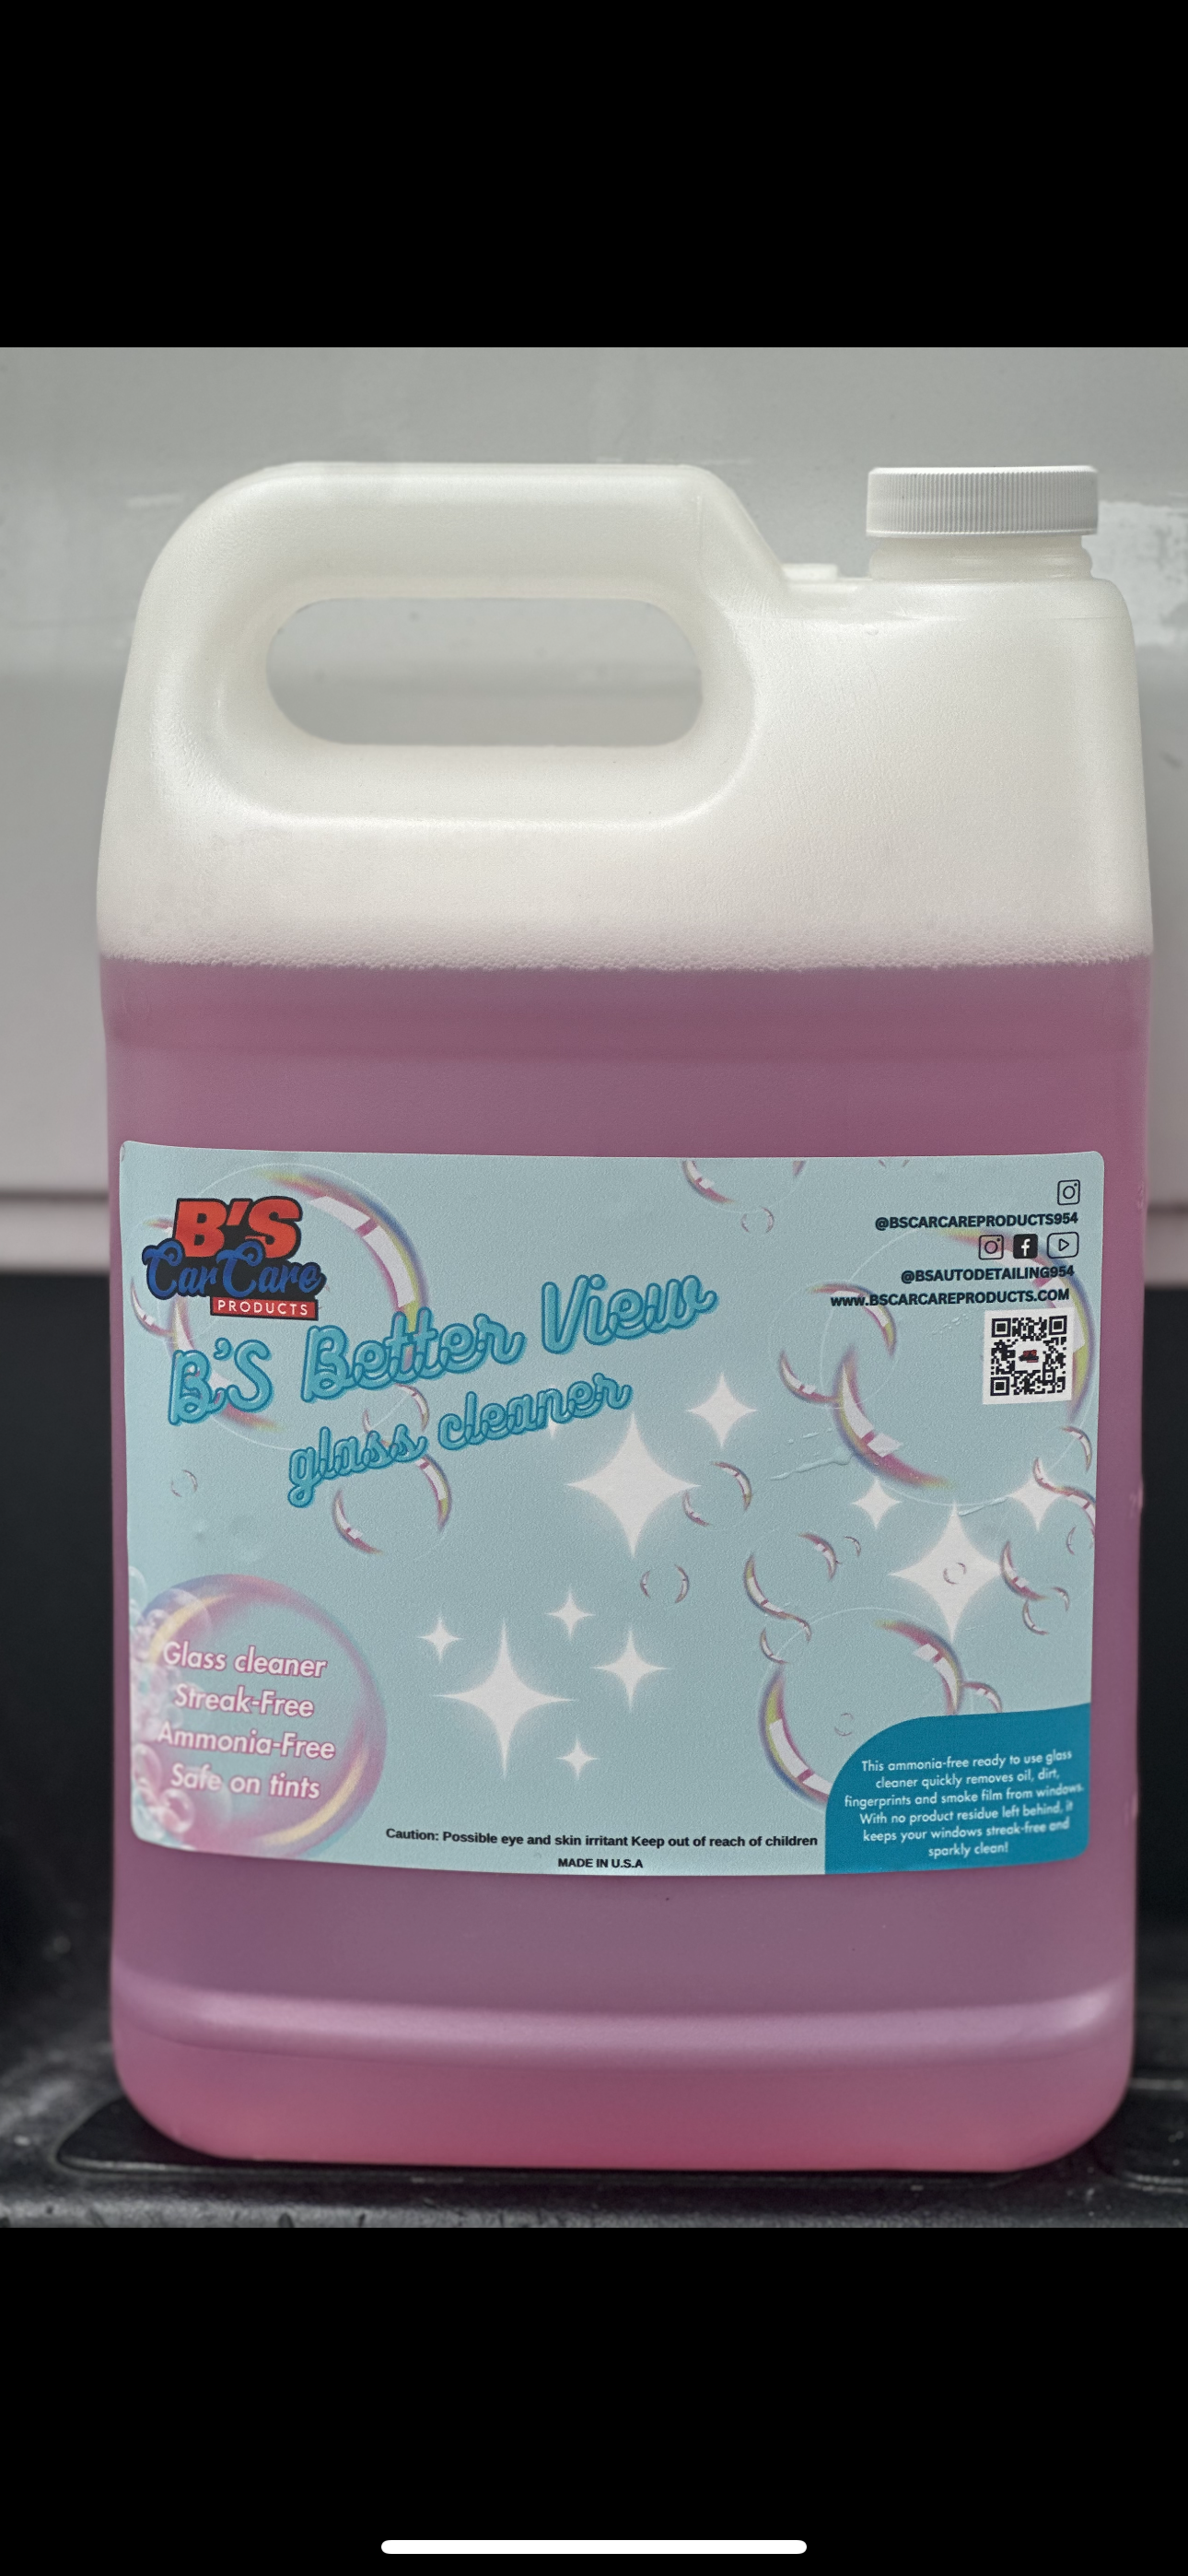 B’S BETTER VIEW GLASS CLEANER (1 gallon)